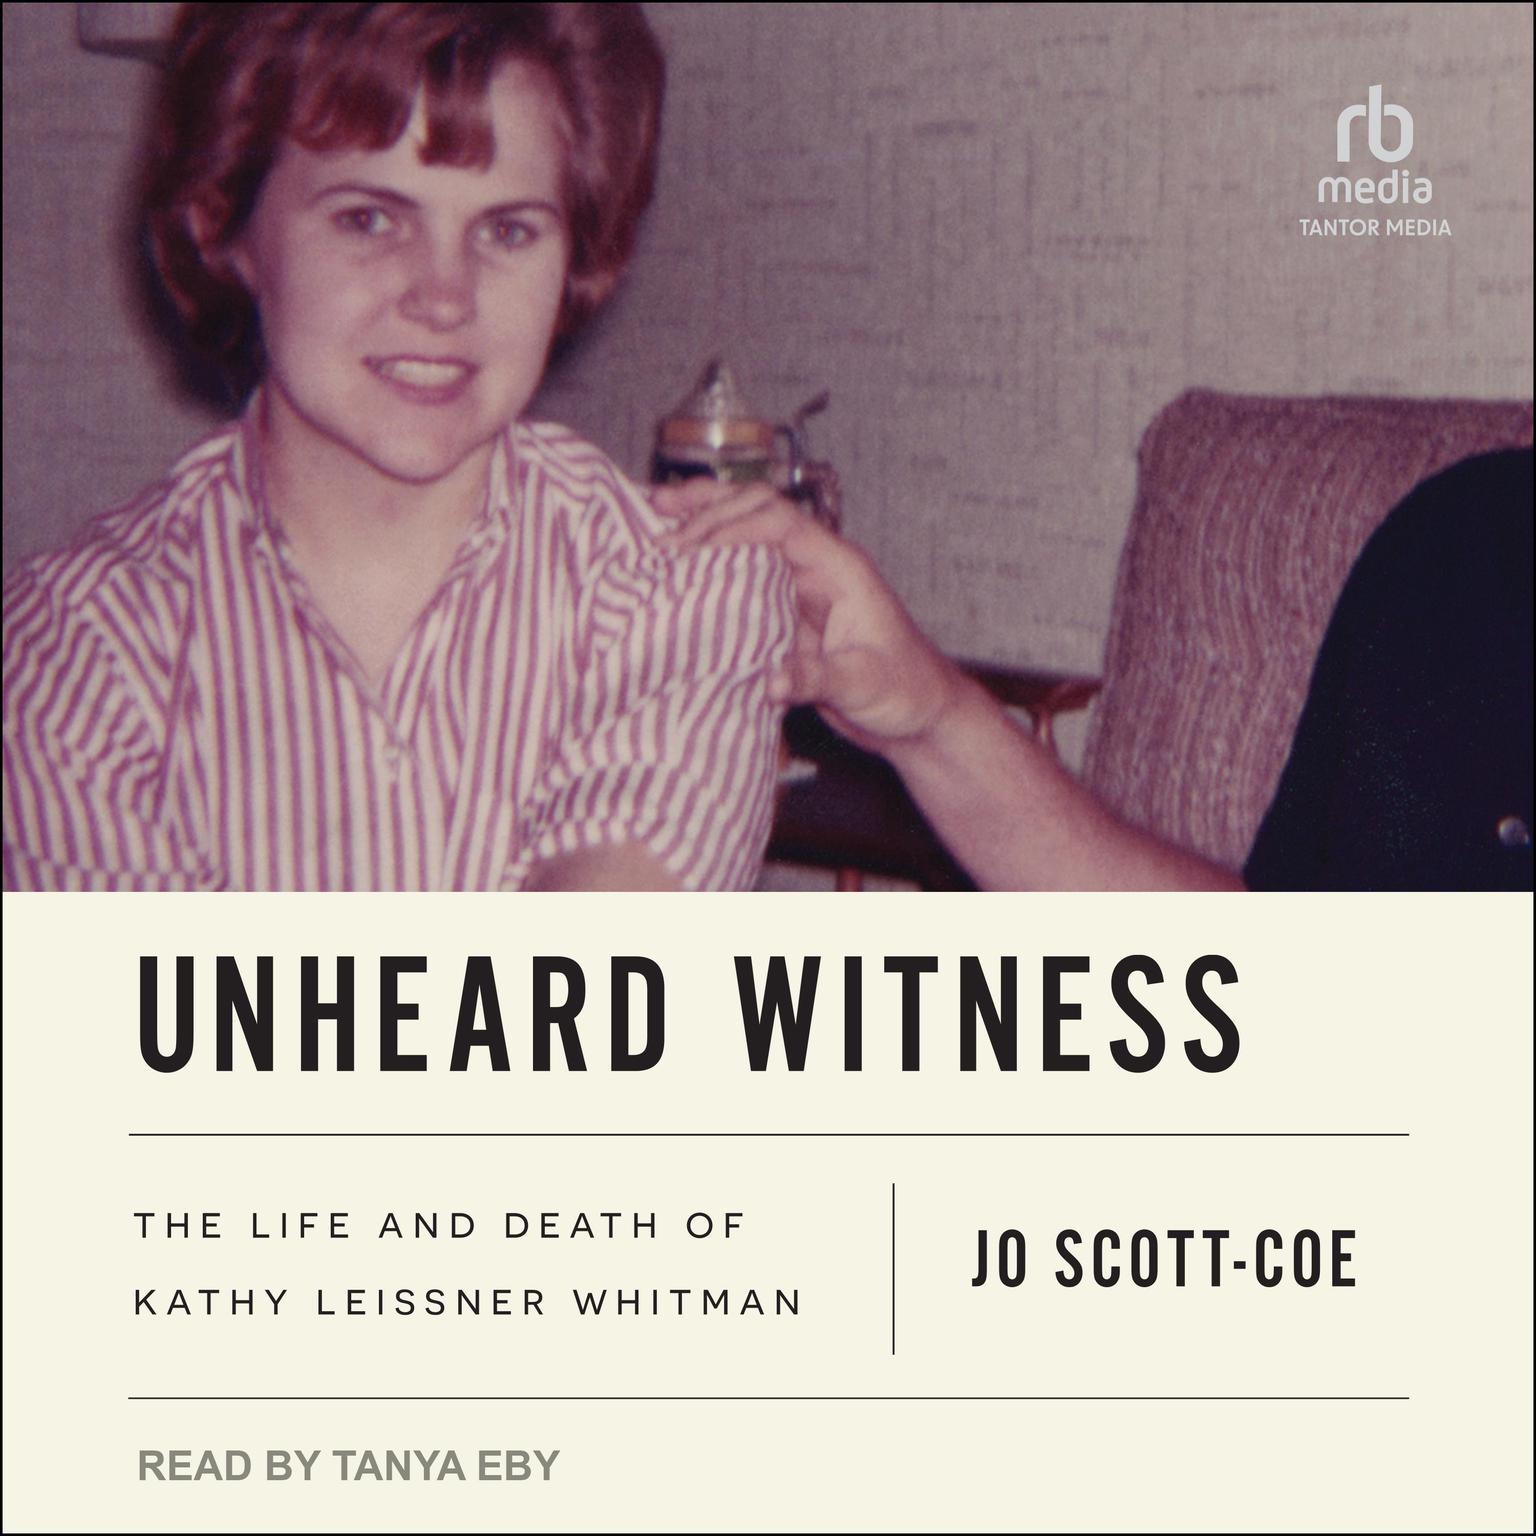 Unheard Witness: The Life and Death of Kathy Leissner Whitman Audiobook, by Jo Scott-Coe